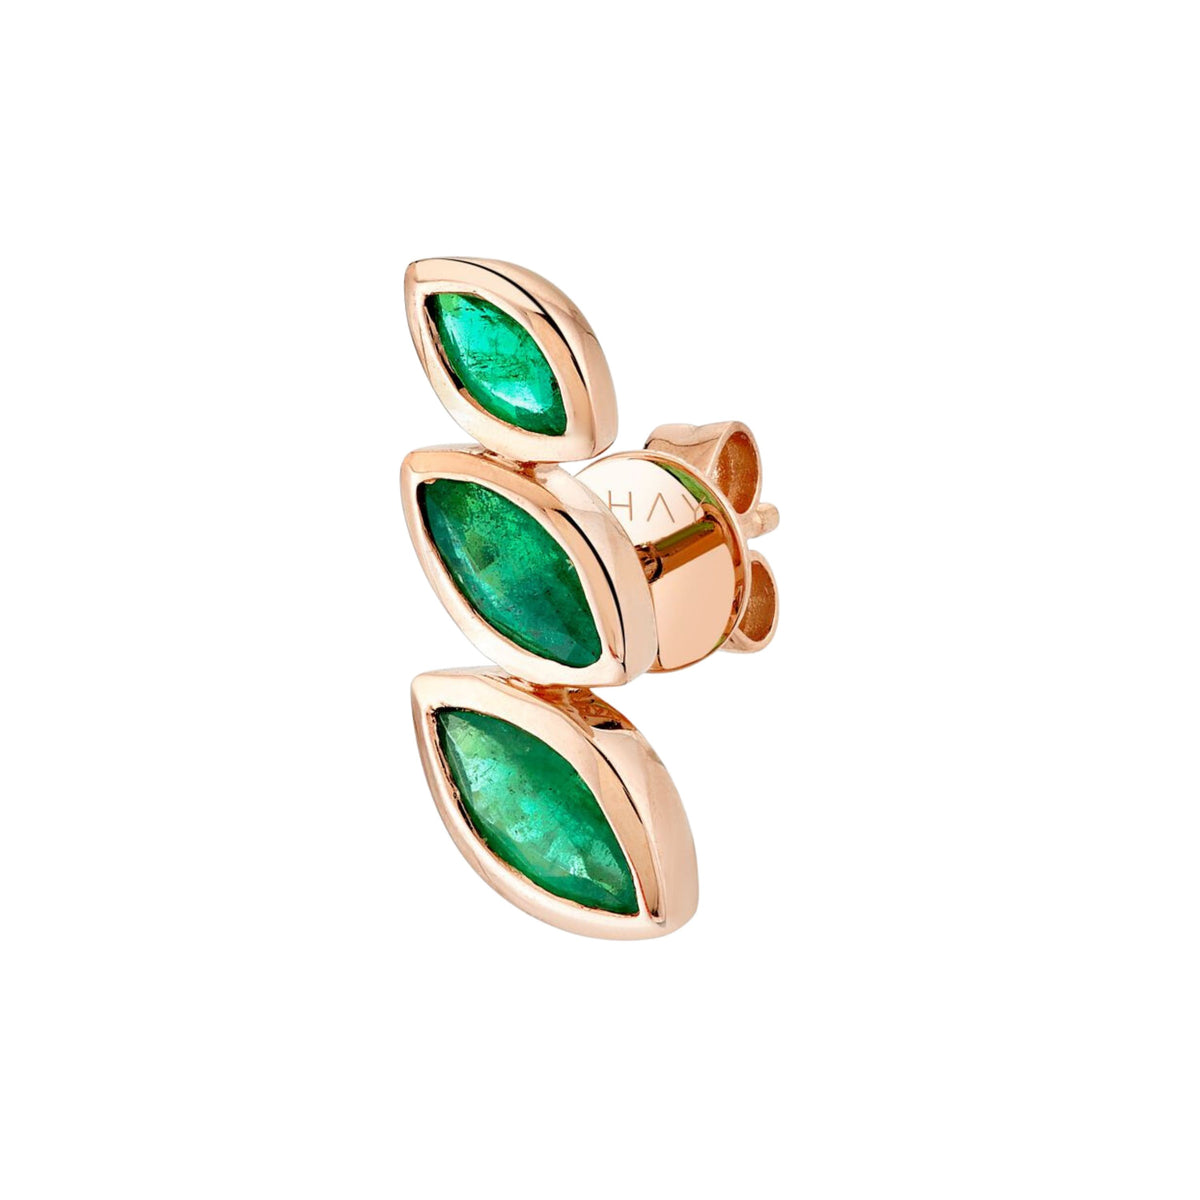 EMERALD STACKED MARQUISE EAR STUD